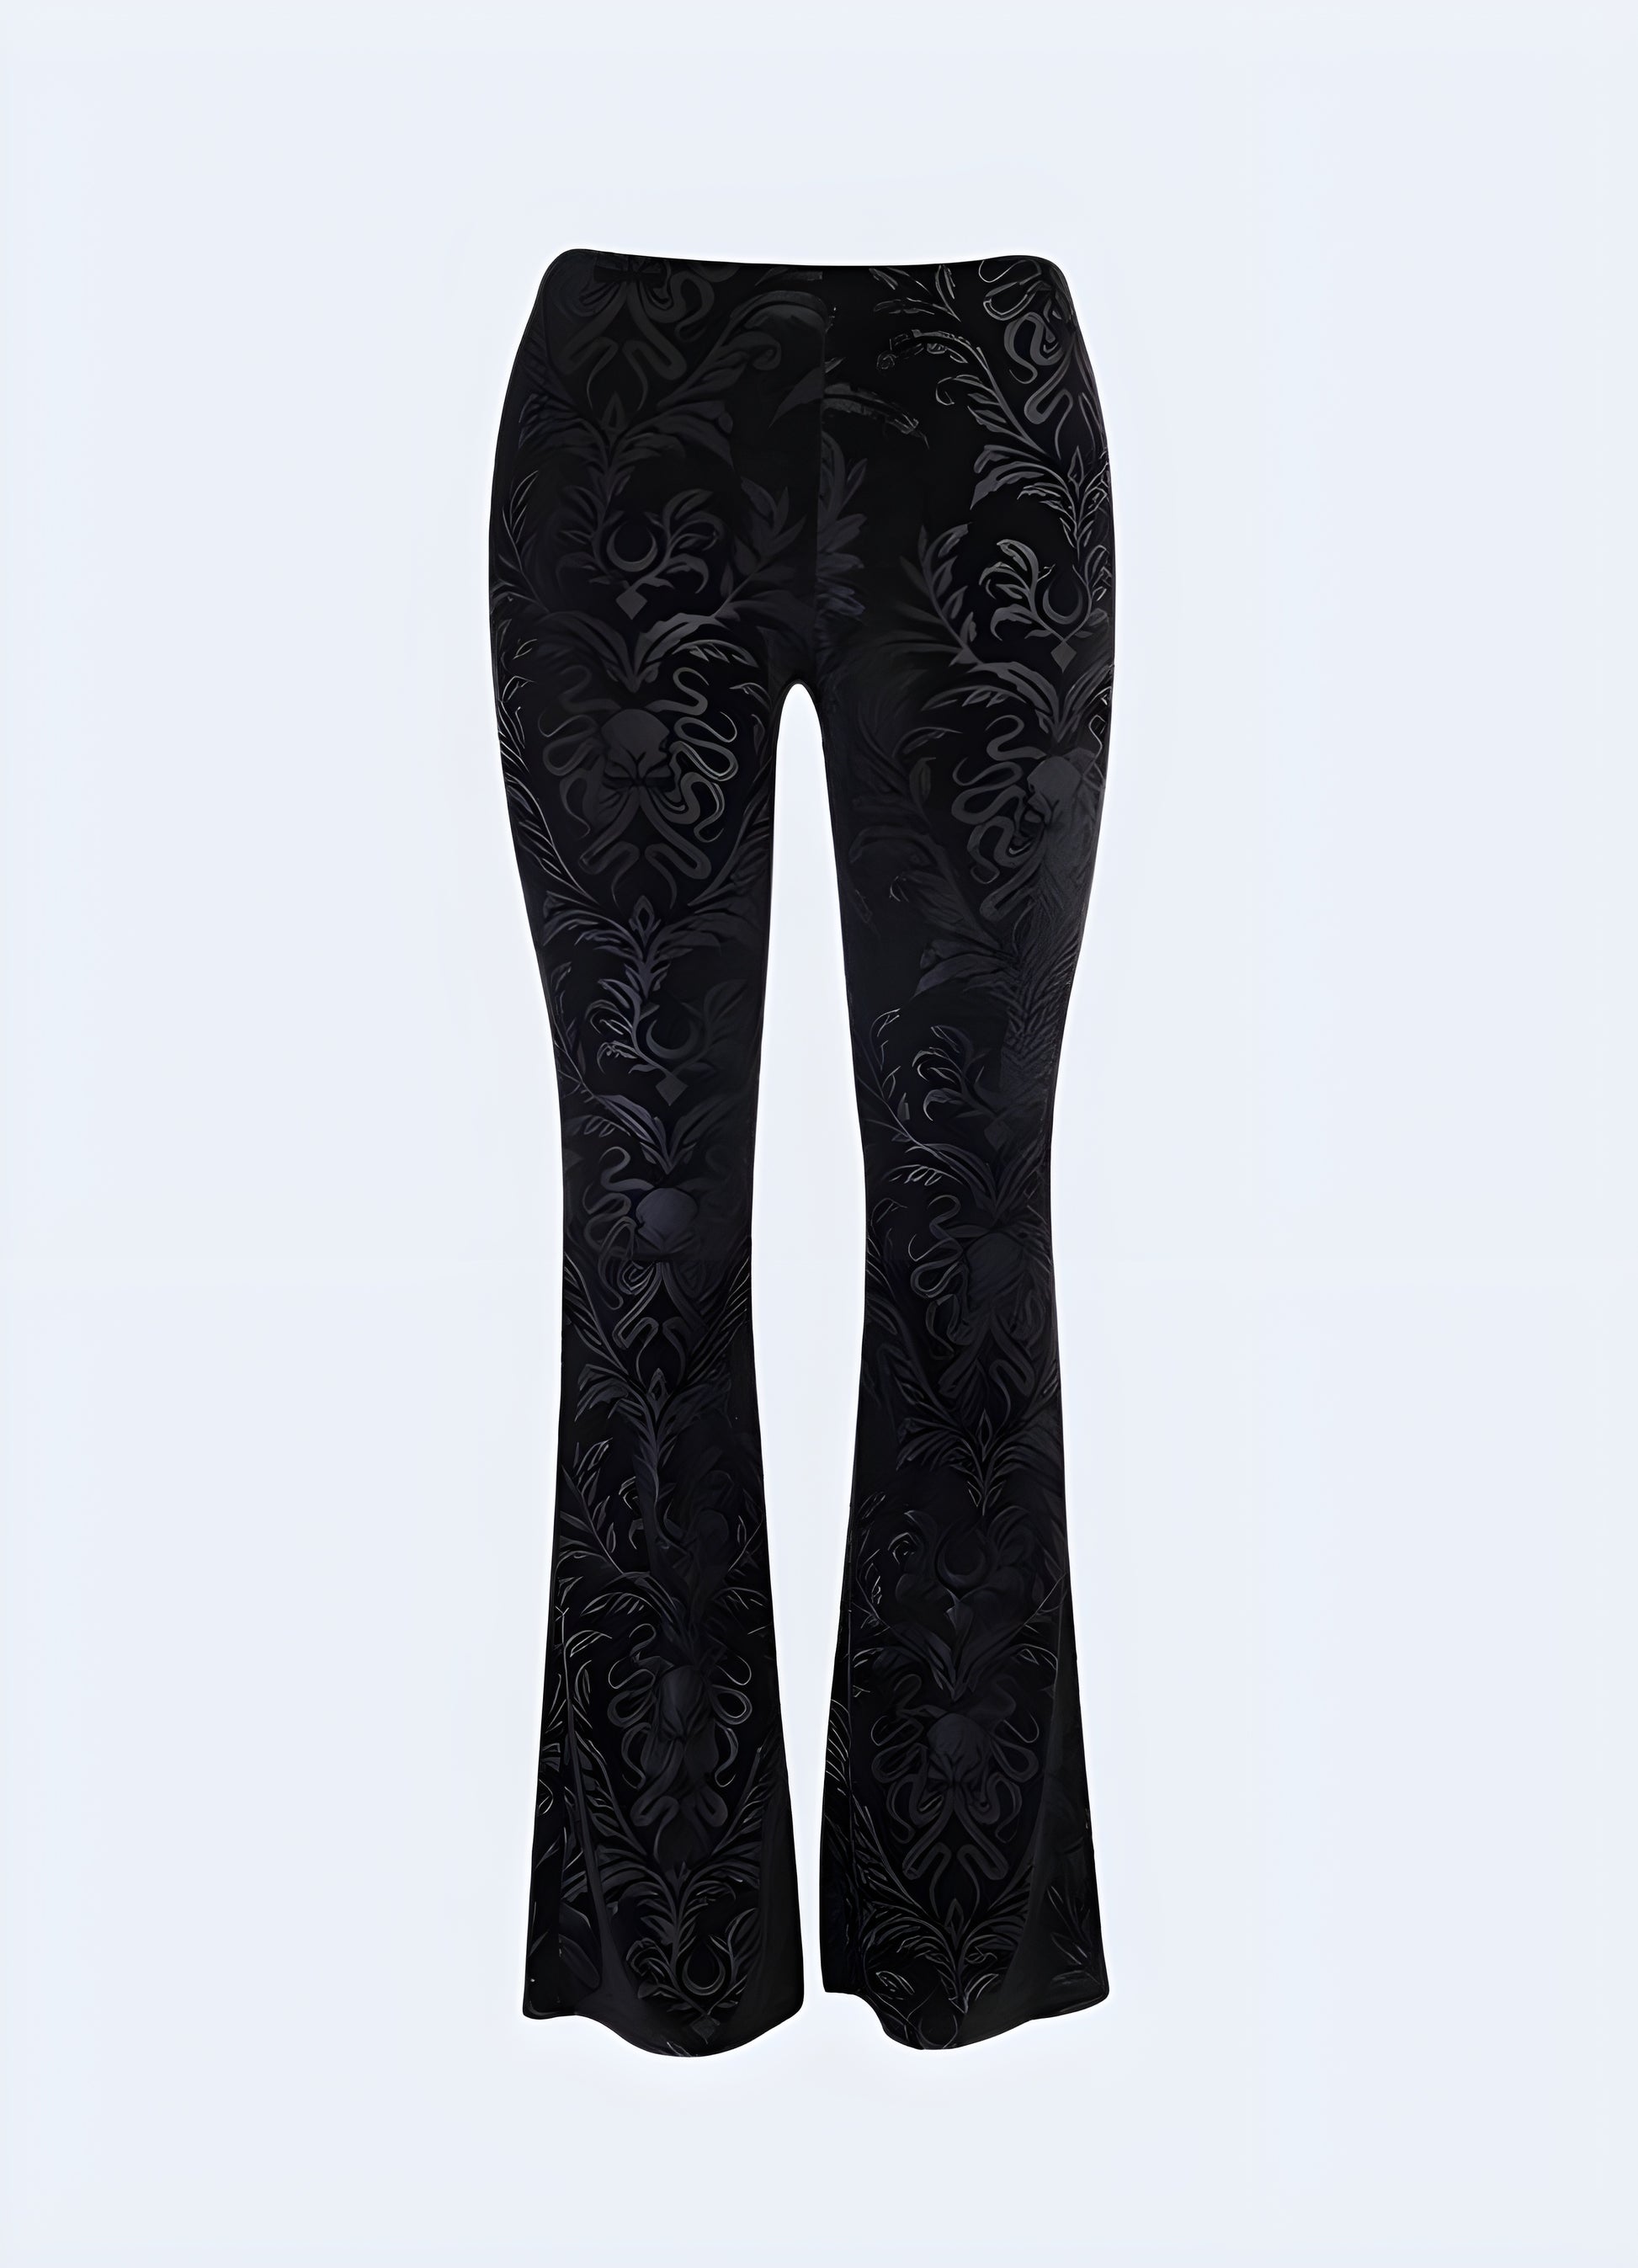 Step up your style game with these sophisticated brocade pants.